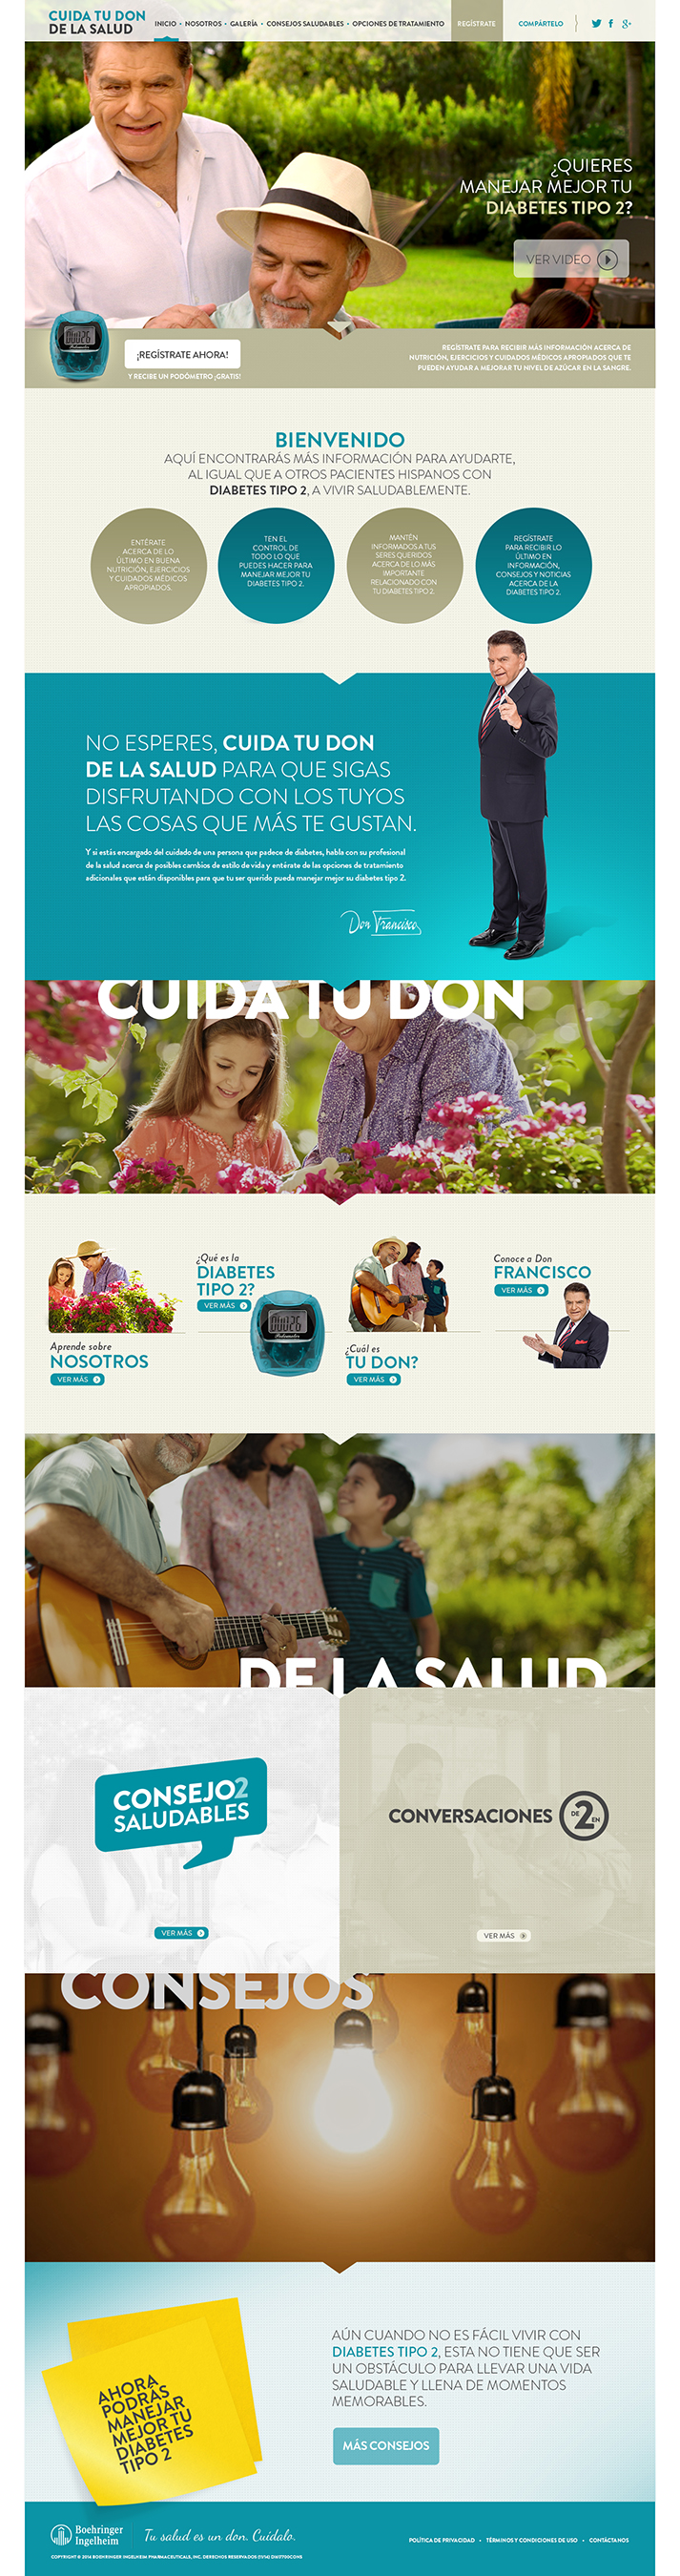 'Cuida tu Don,' is designed to engage, educate and inspire Hispanics with type 2 diabetes and their families. The initiative provides resources and information in three key aspects of diabetes - nutrition, fitness and treatment options.